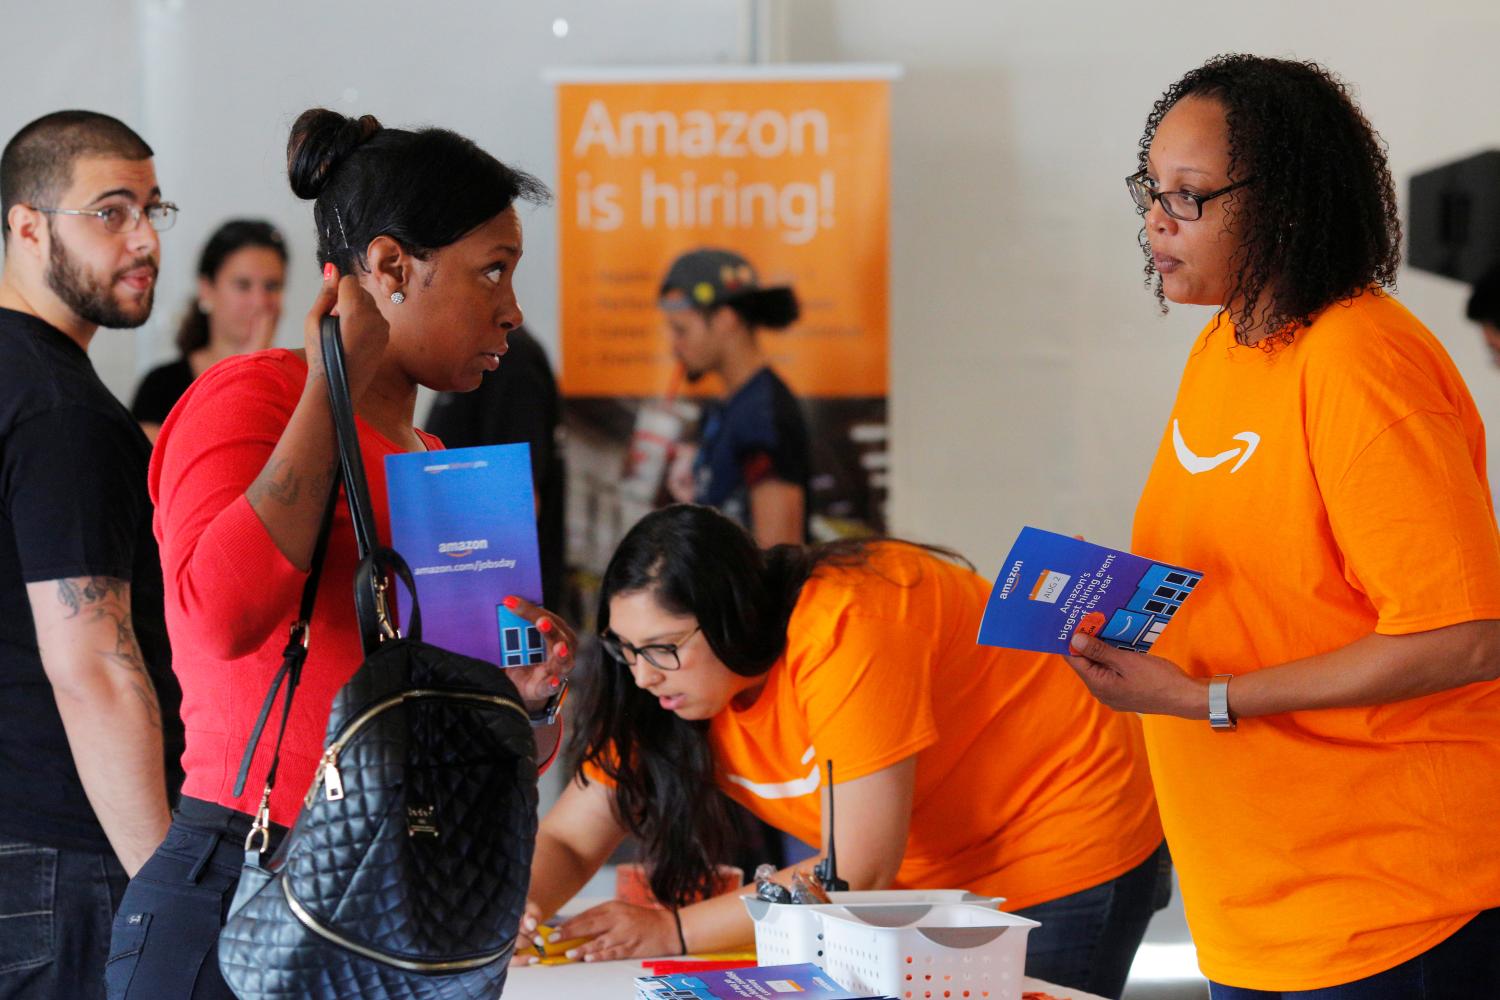 Potential job applicants register for "Amazon Jobs Day," a job fair being held at 10 fulfillment centers across the United States aimed at filling more than 50,000 jobs, at the Amazon.com Fulfillment Center in Fall River, Massachusetts, U.S., August 2, 2017.   REUTERS/Brian Snyder - RC19CB5C0CE0